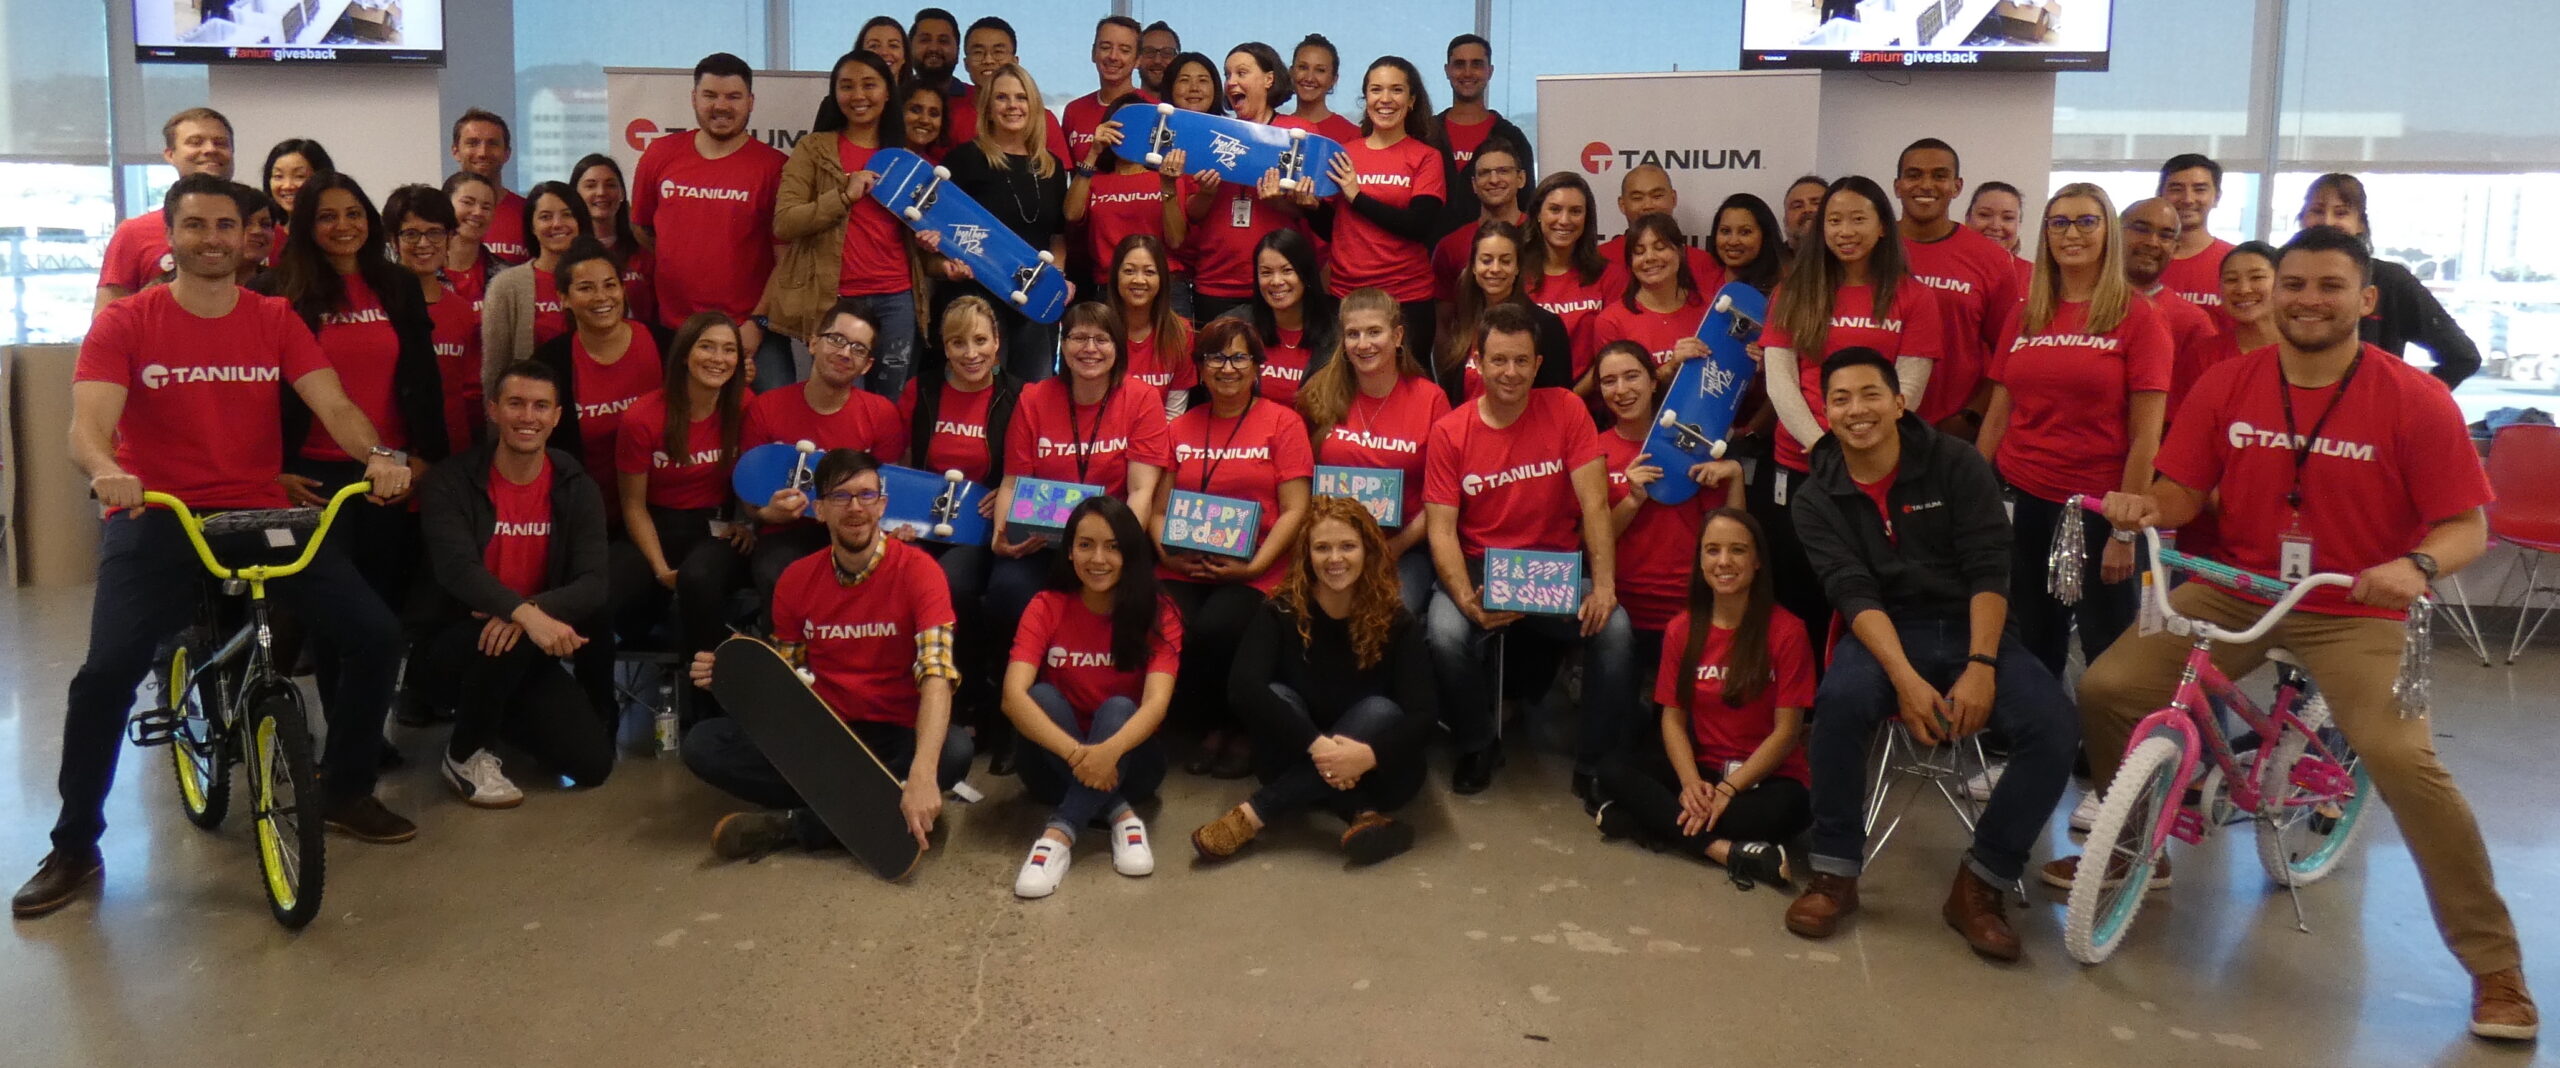 Tanium employees in the Emeryville office celebrating the week of giving.